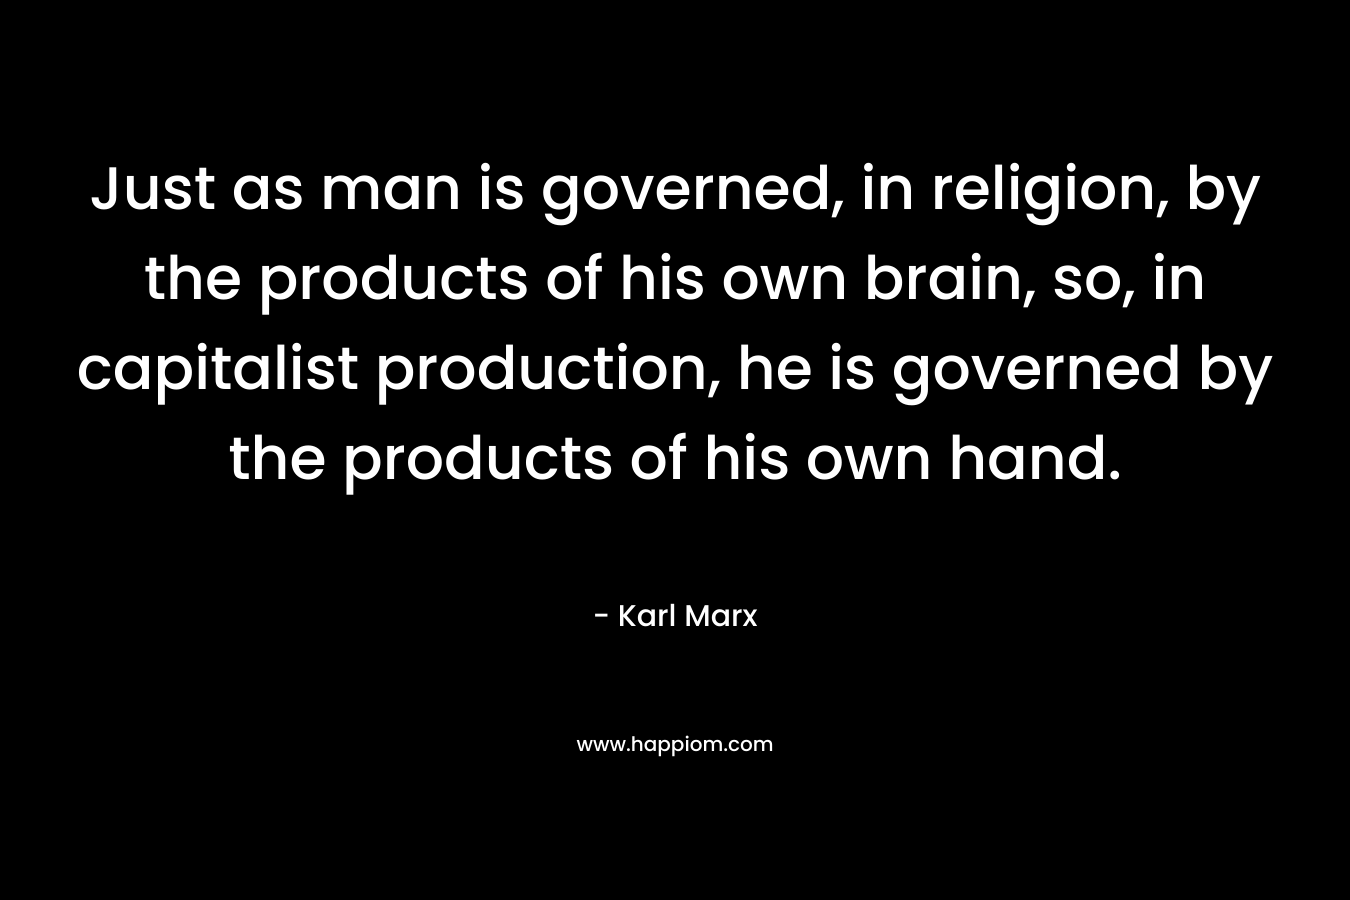 Just as man is governed, in religion, by the products of his own brain, so, in capitalist production, he is governed by the products of his own hand. – Karl Marx